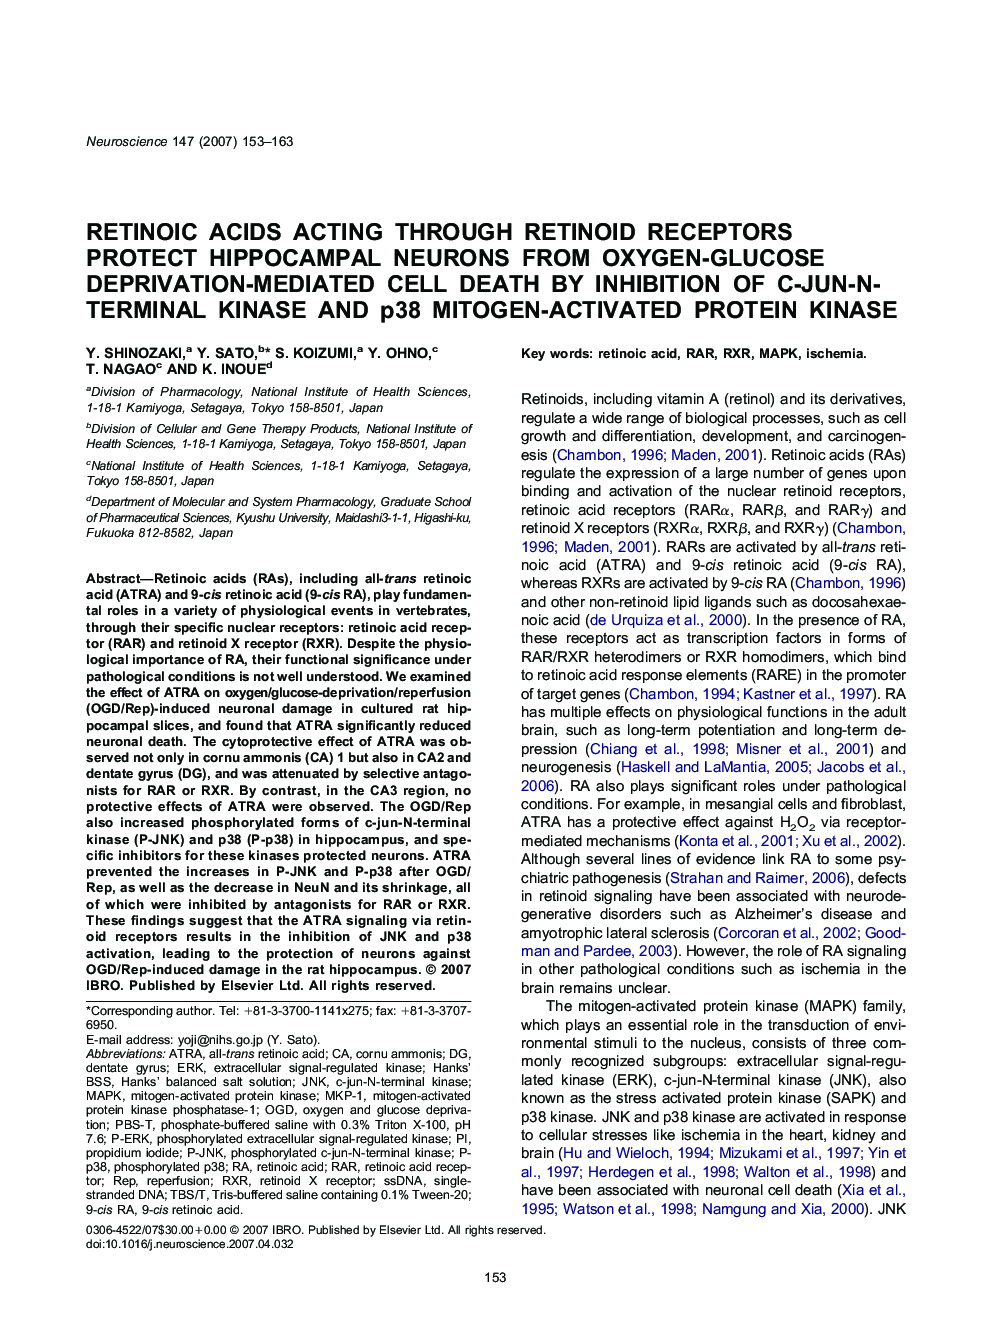 Retinoic acids acting through retinoid receptors protect hippocampal neurons from oxygen-glucose deprivation-mediated cell death by inhibition of c-jun-N-terminal kinase and p38 mitogen-activated protein kinase